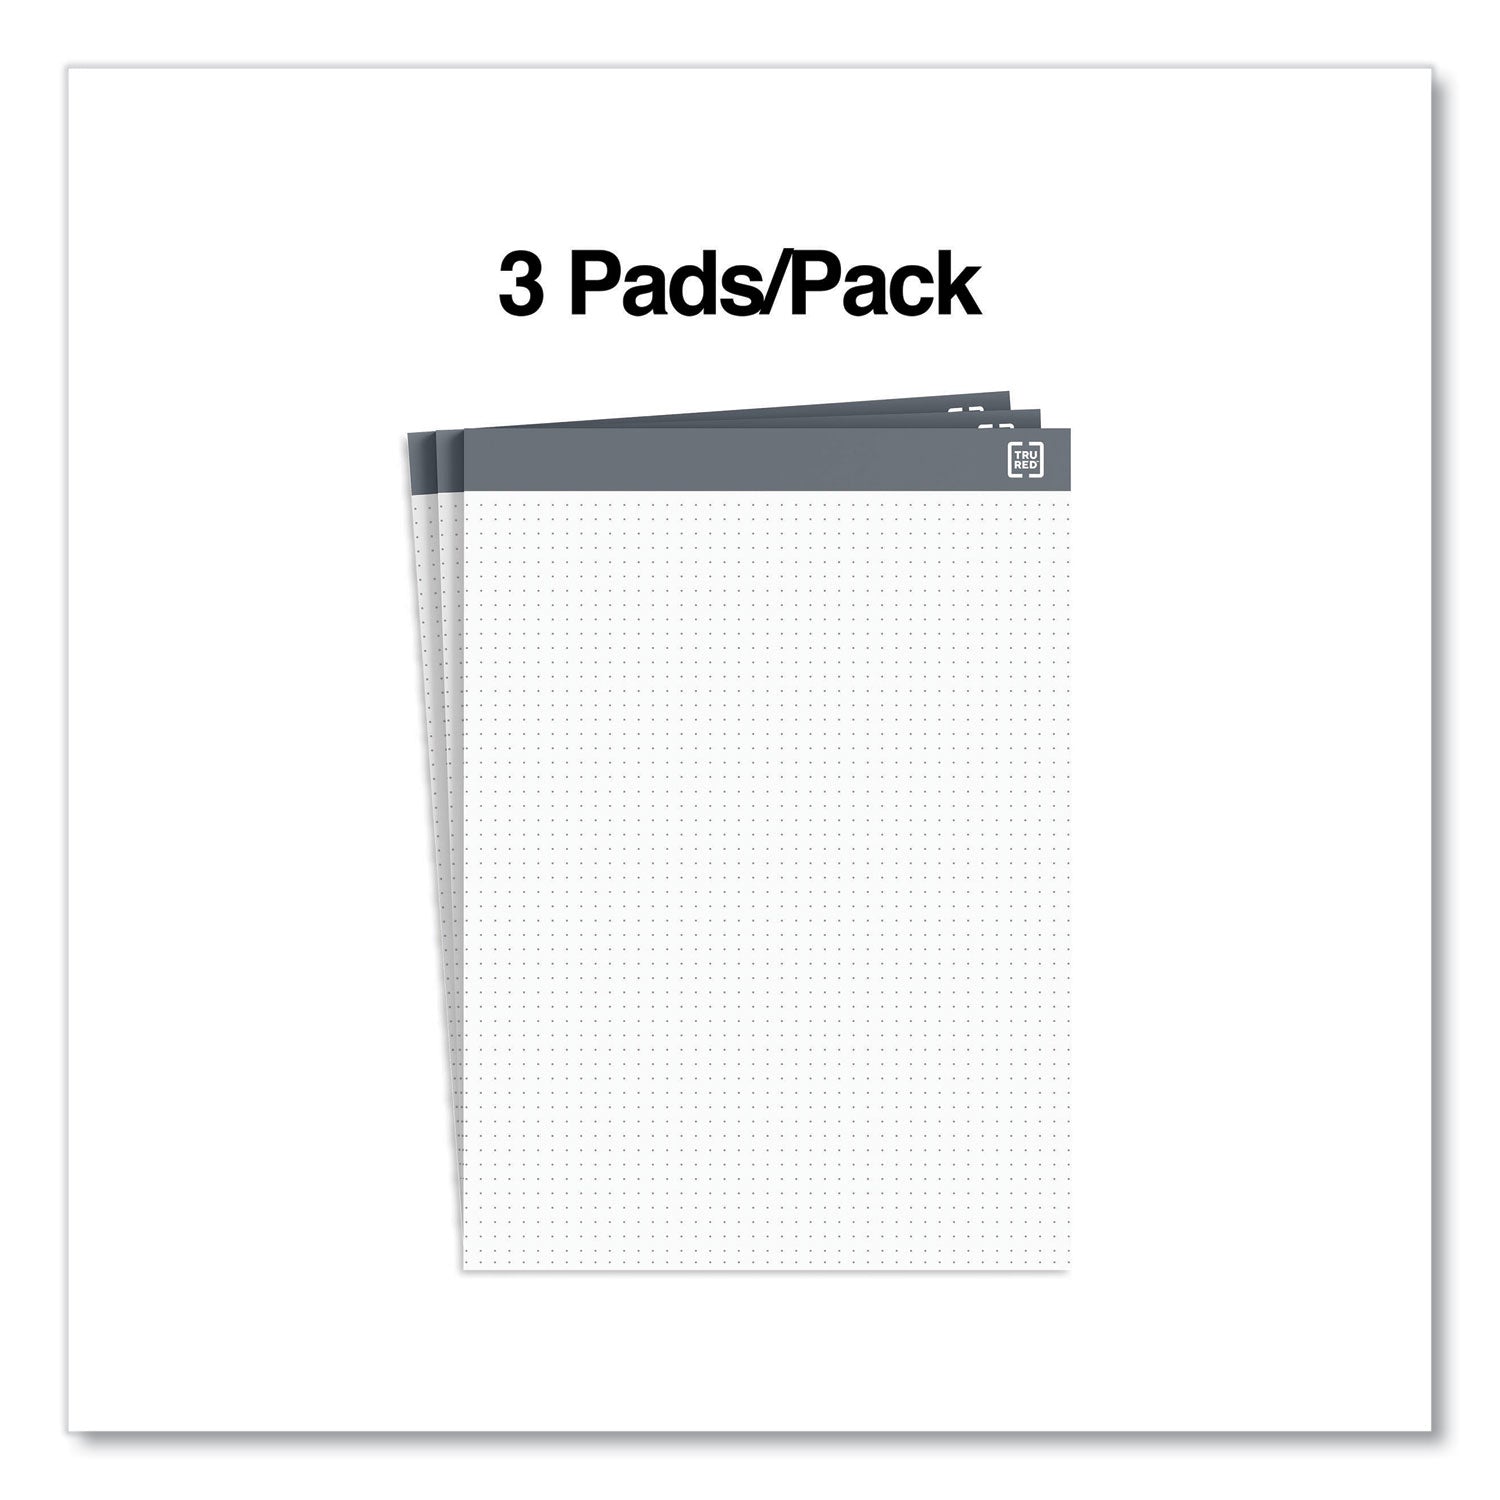 writing-pad-dotted-rule-4-sq-in-50-white-85-x-11-sheets_tud59957 - 5